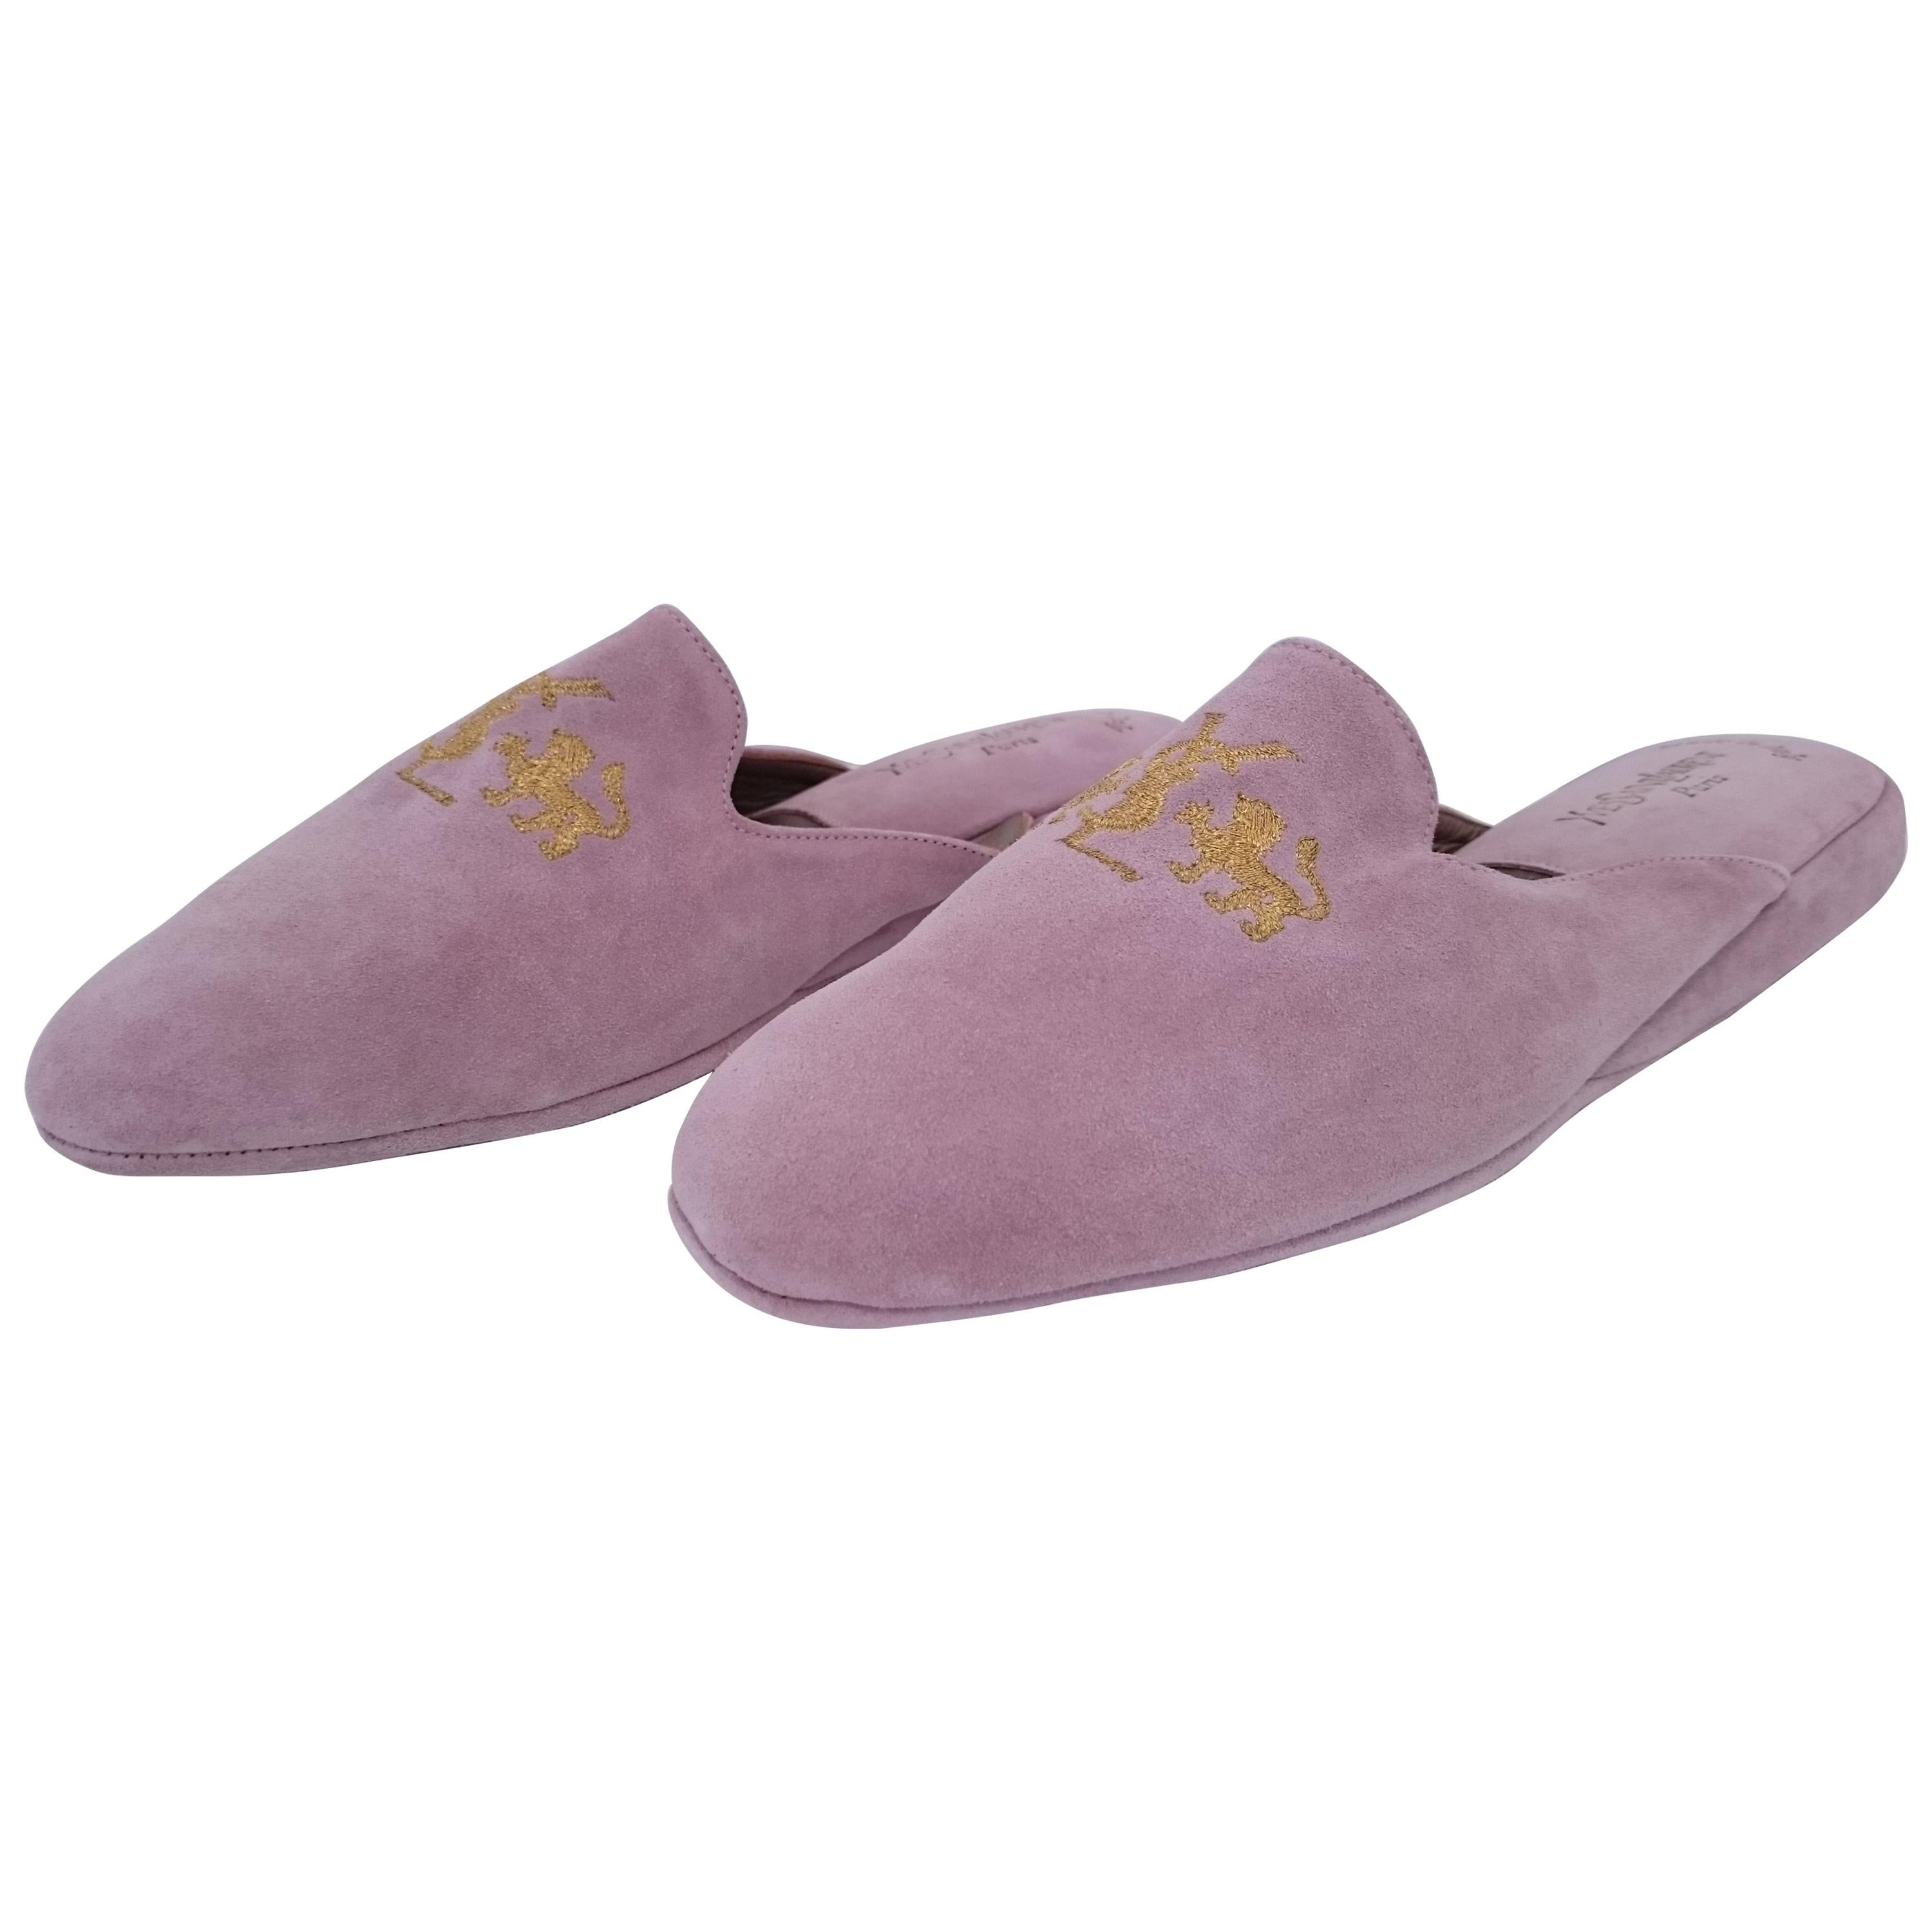 Yves Saint Laurent Pink Suede Slippers for Home. NEW. Size 10 1/2  For Sale